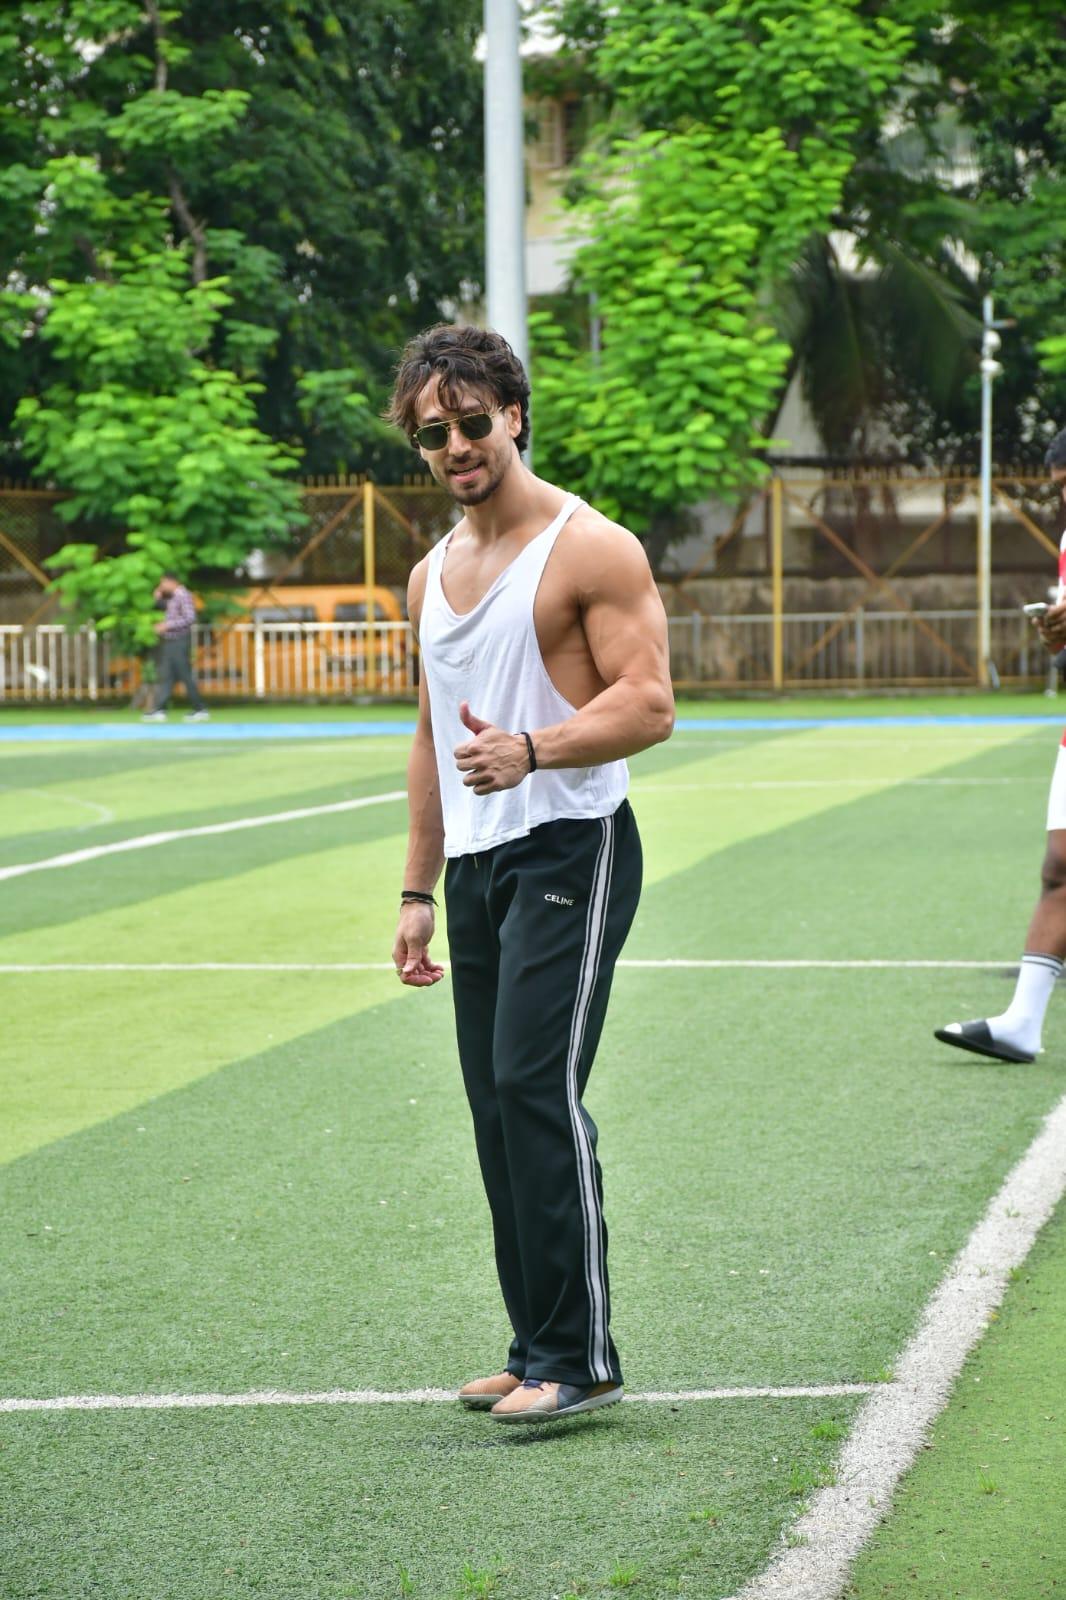 Tiger Shroff was also spotted at the football match.